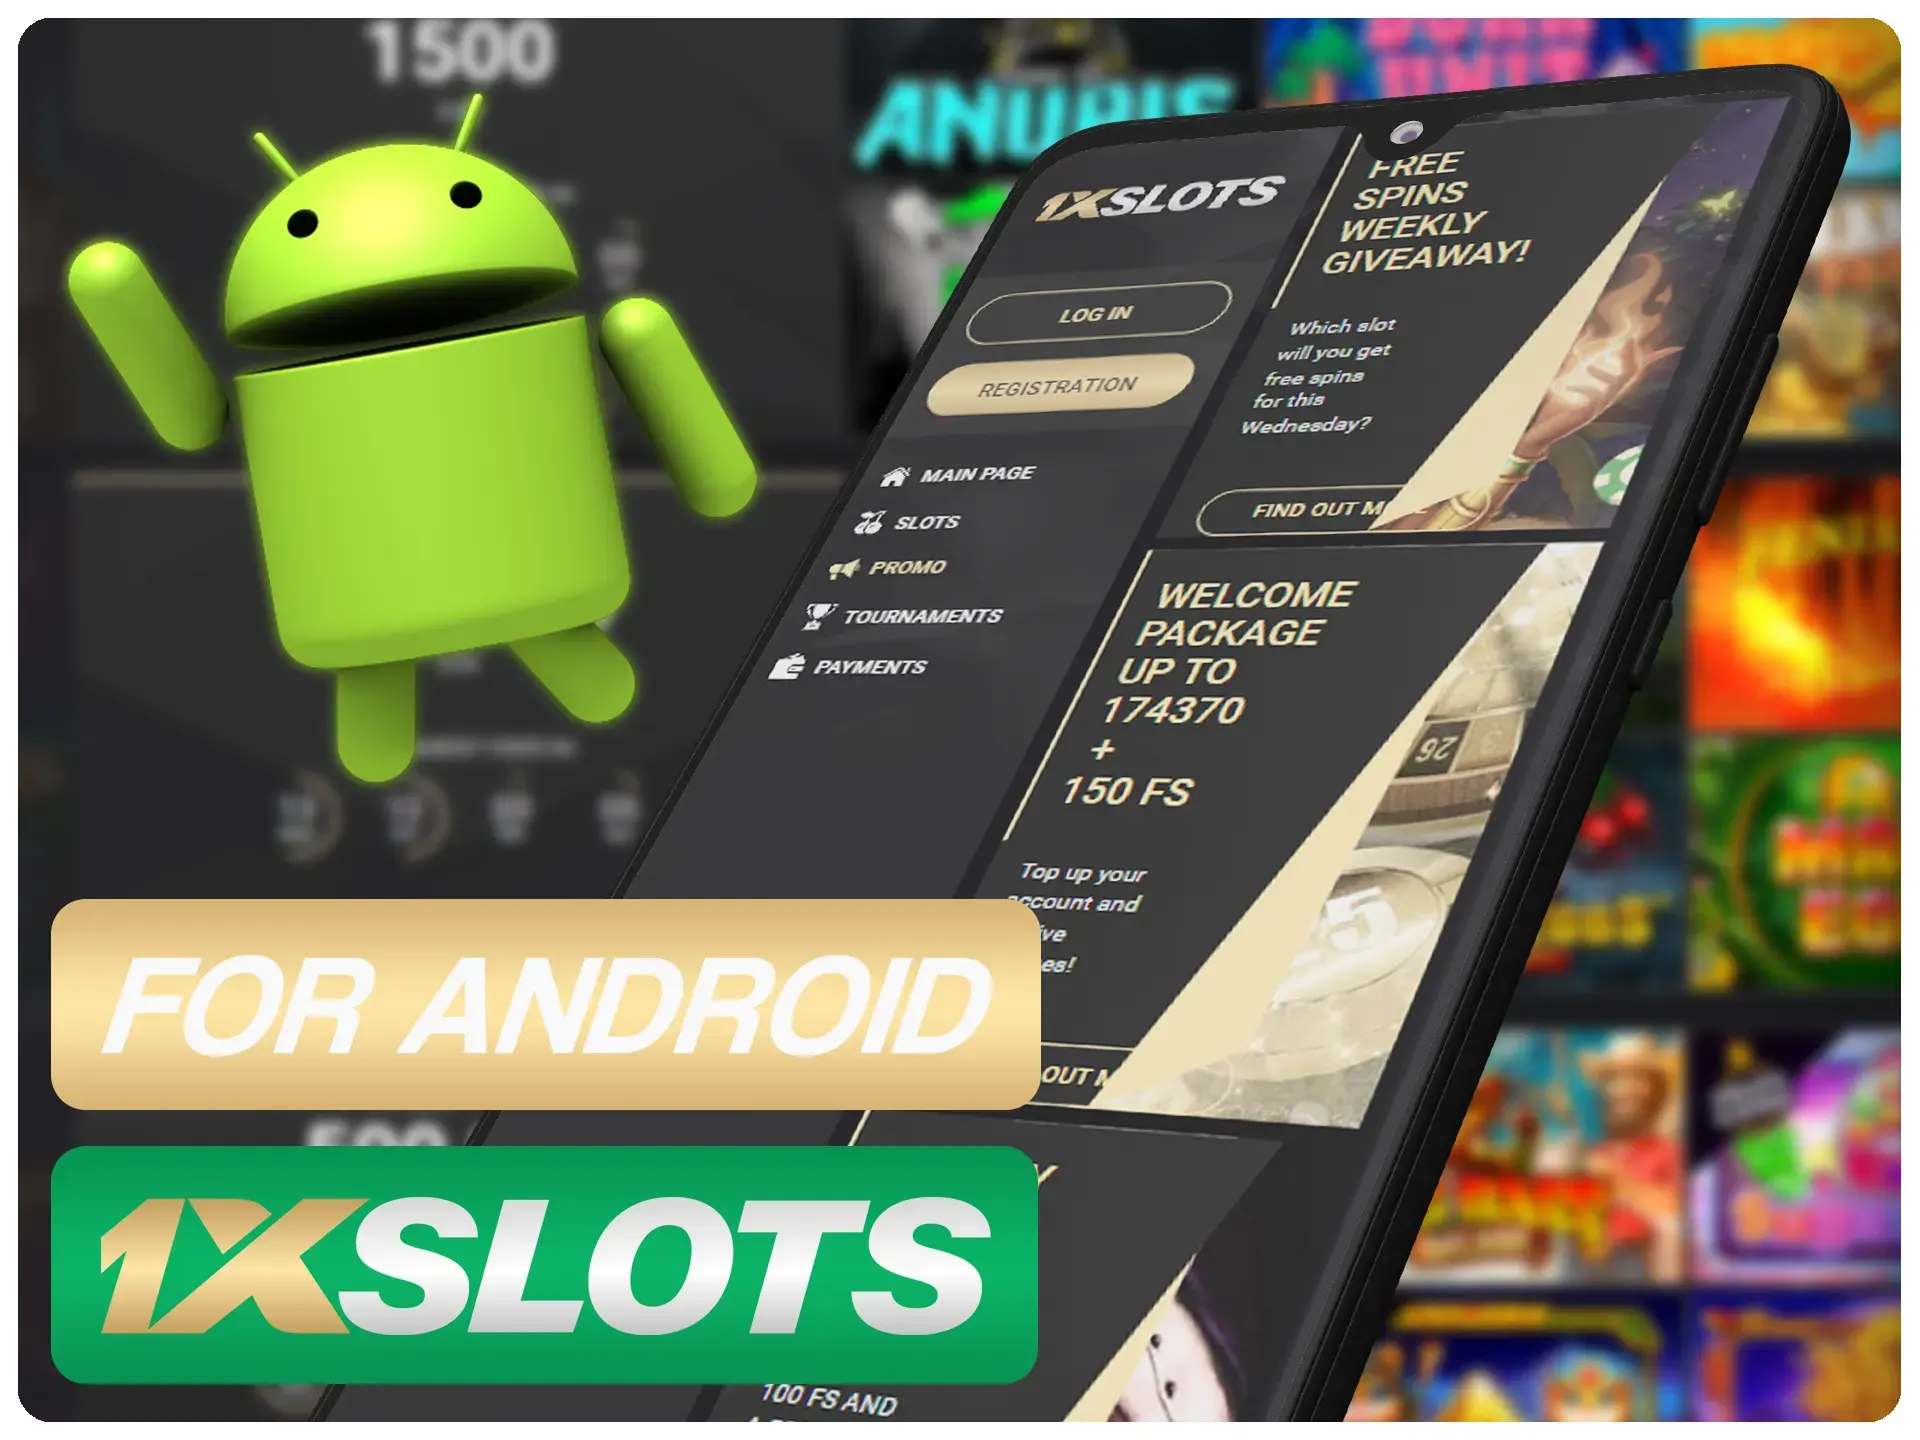 1xSlots app can be installed on most of the Android devices.